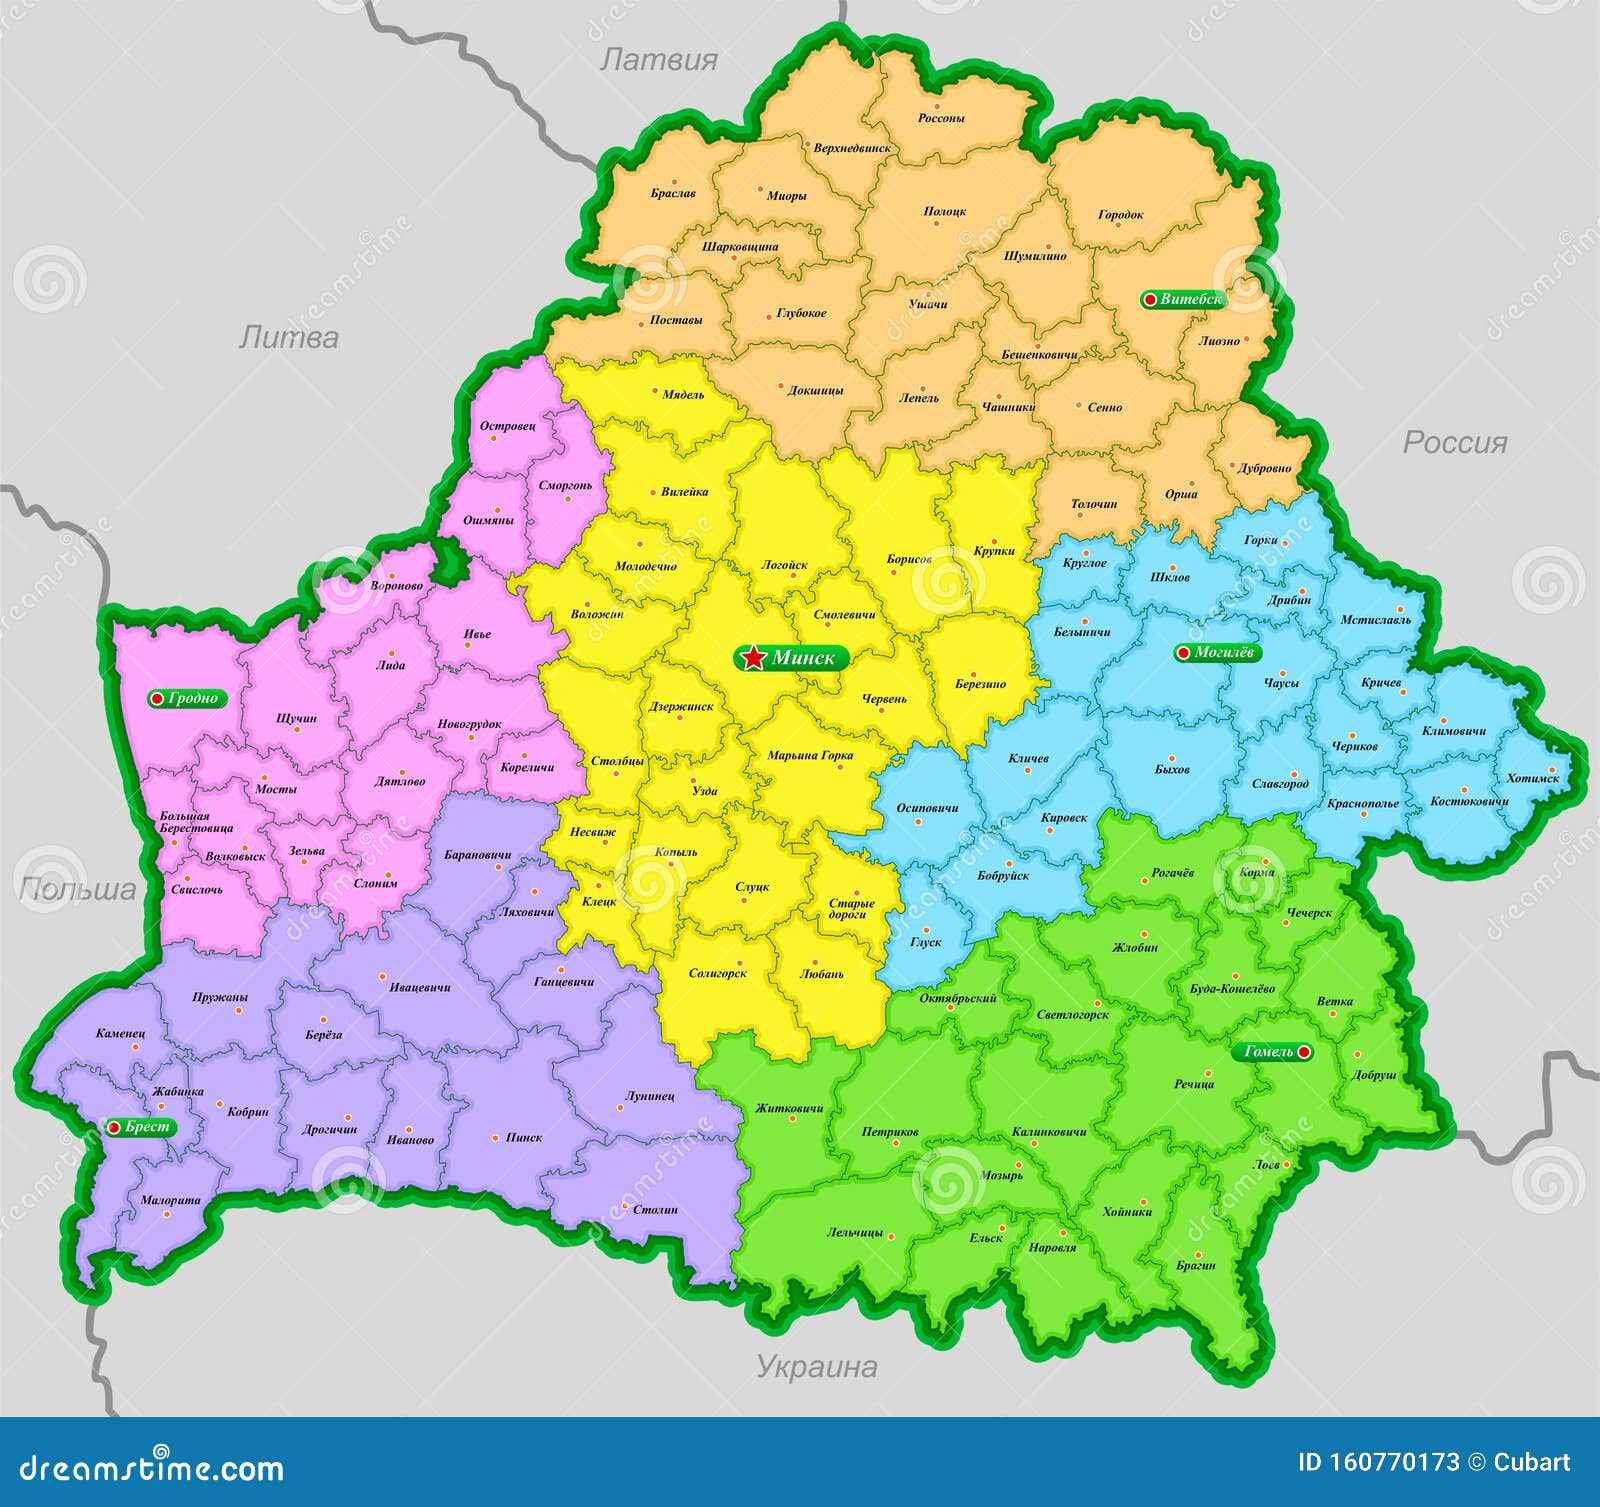 Map Of The Republic Of Belarus Marked By Regions And Districts In